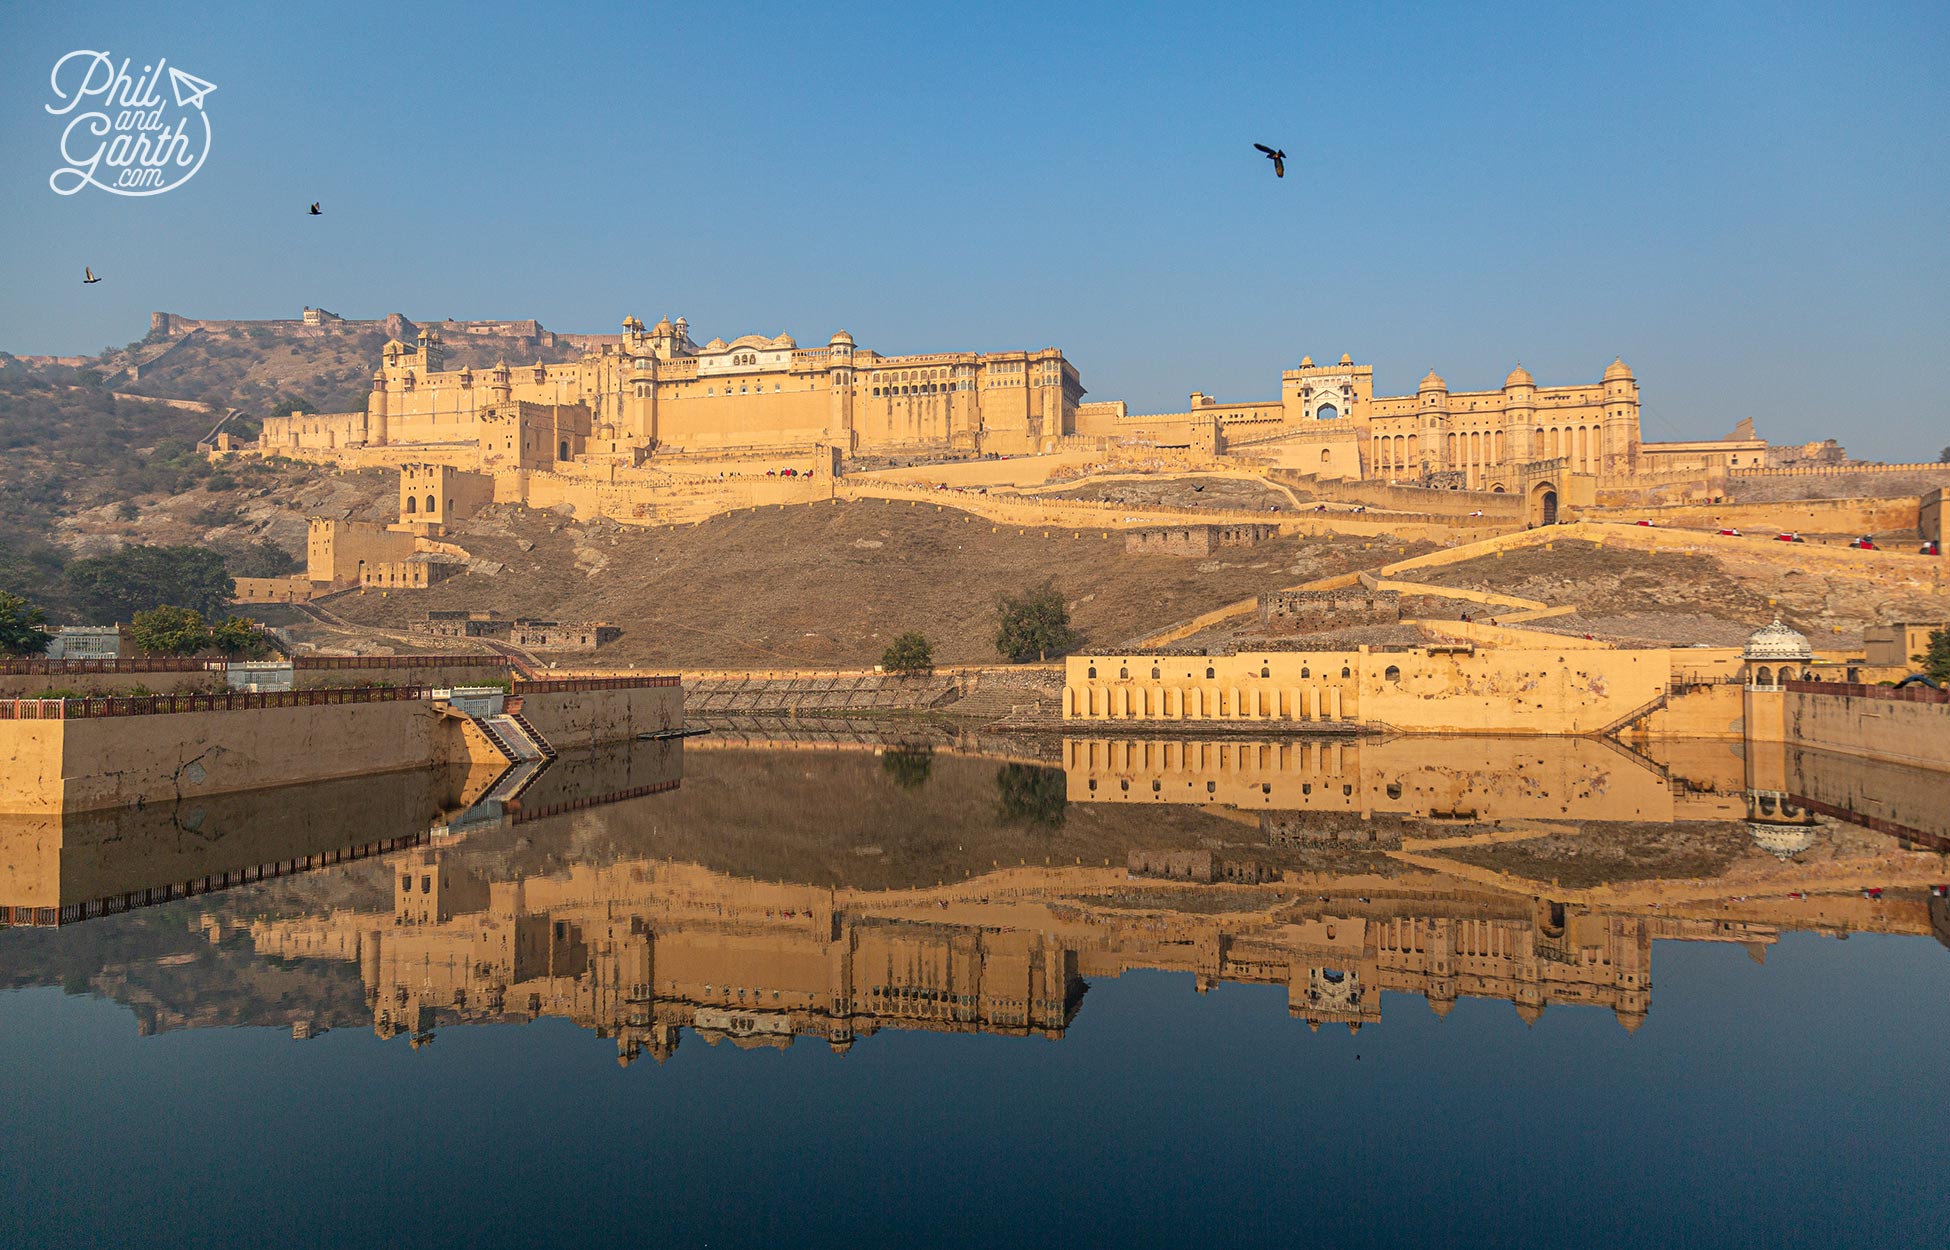 Jaipur's imposing Amber Fort also called Amer Fort took 100 years to complete